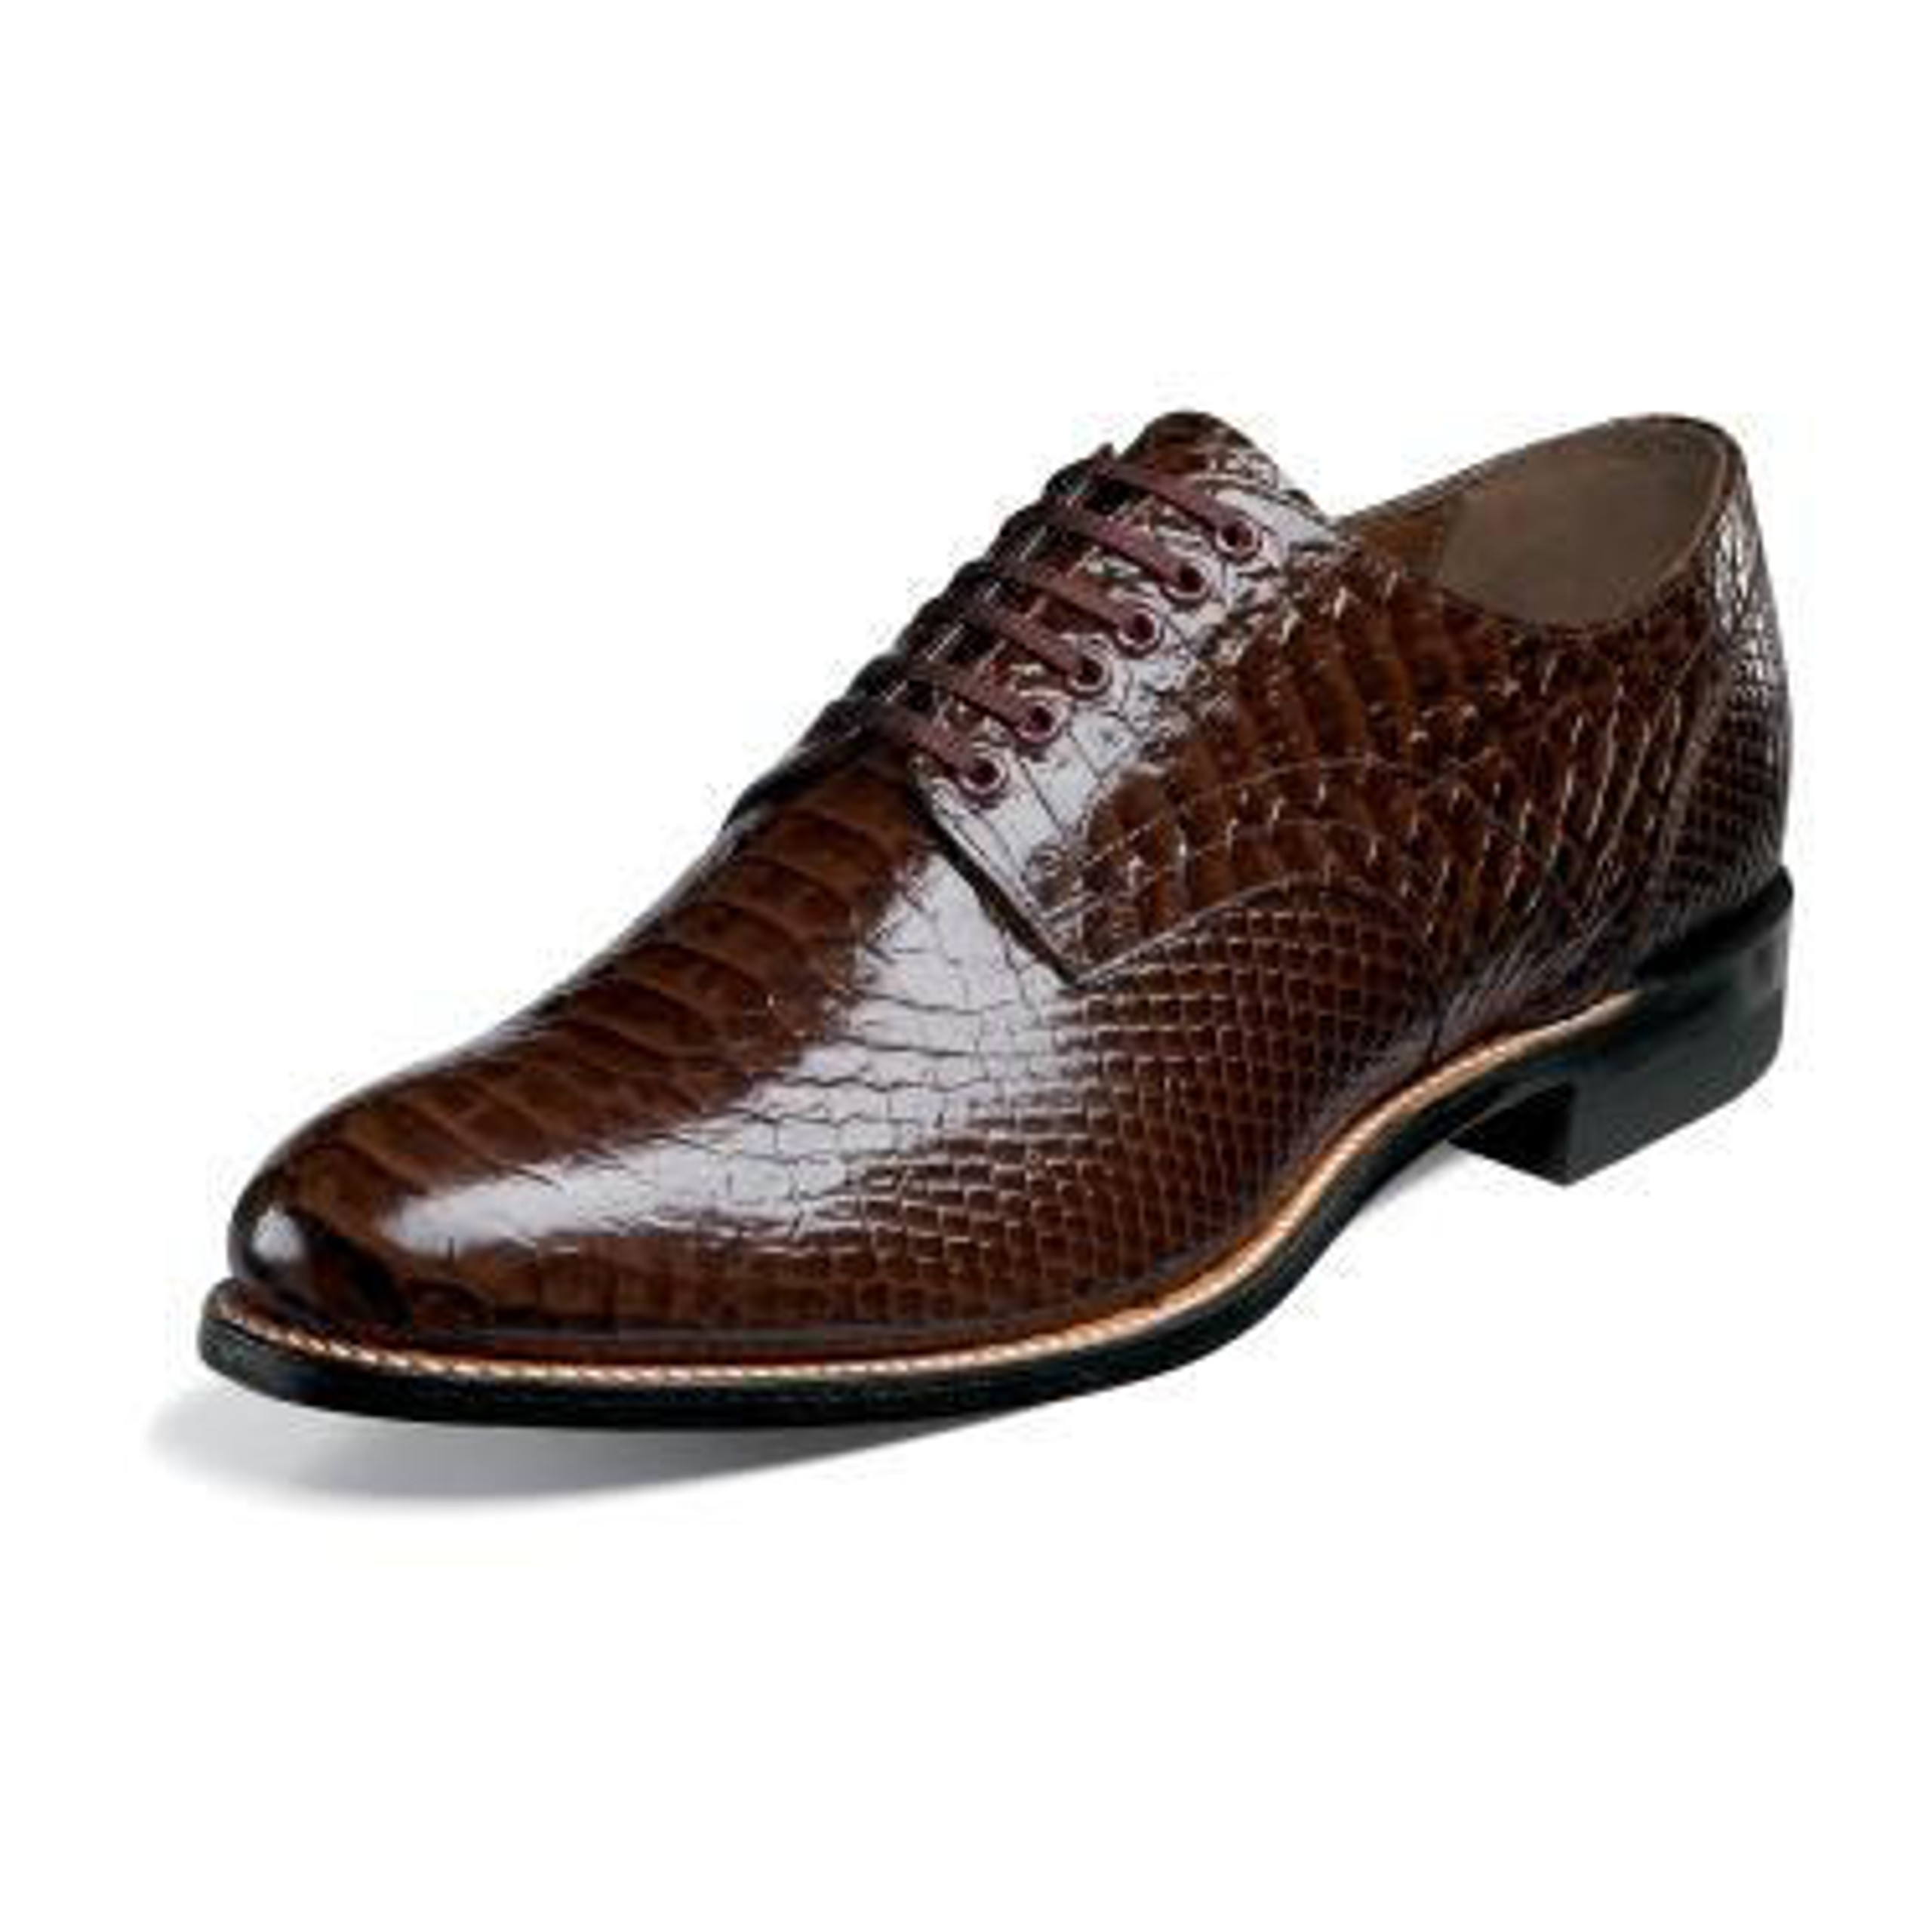 Dress Shoes On Clearance | 50-70% Off | Contemposuits.com